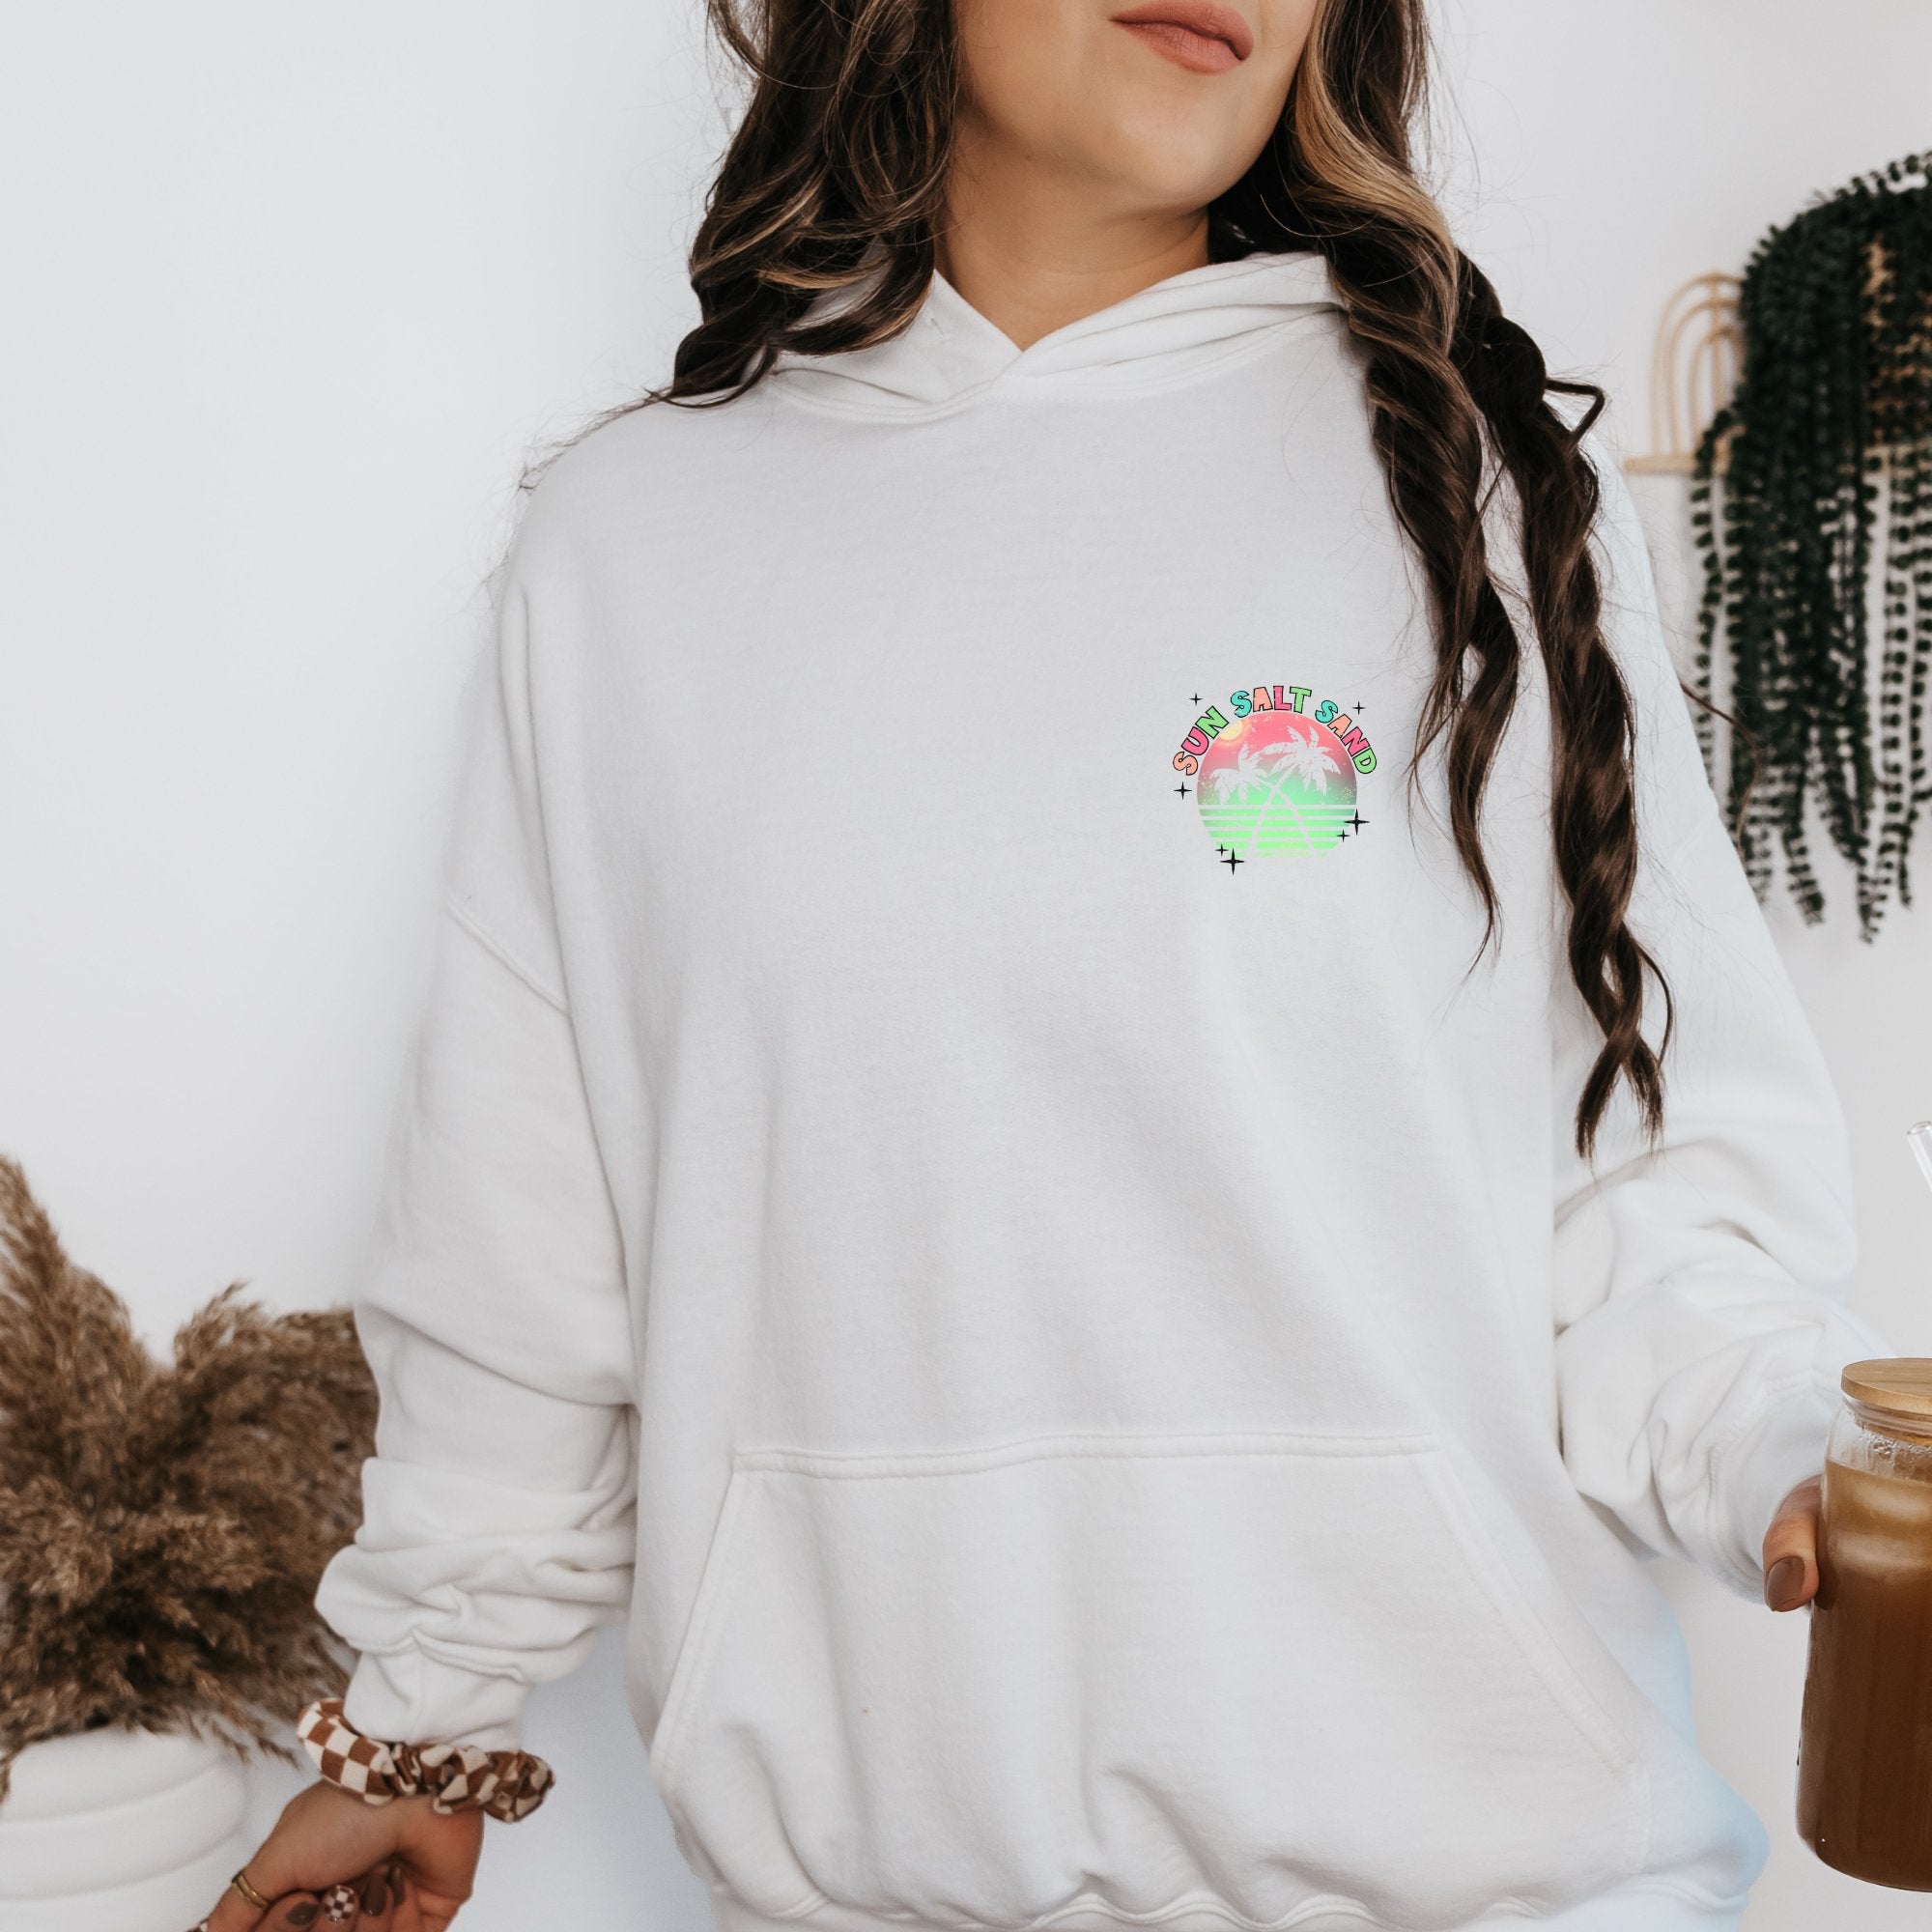 Sun Salt Sand Double Sided Hoodie - Trendznmore